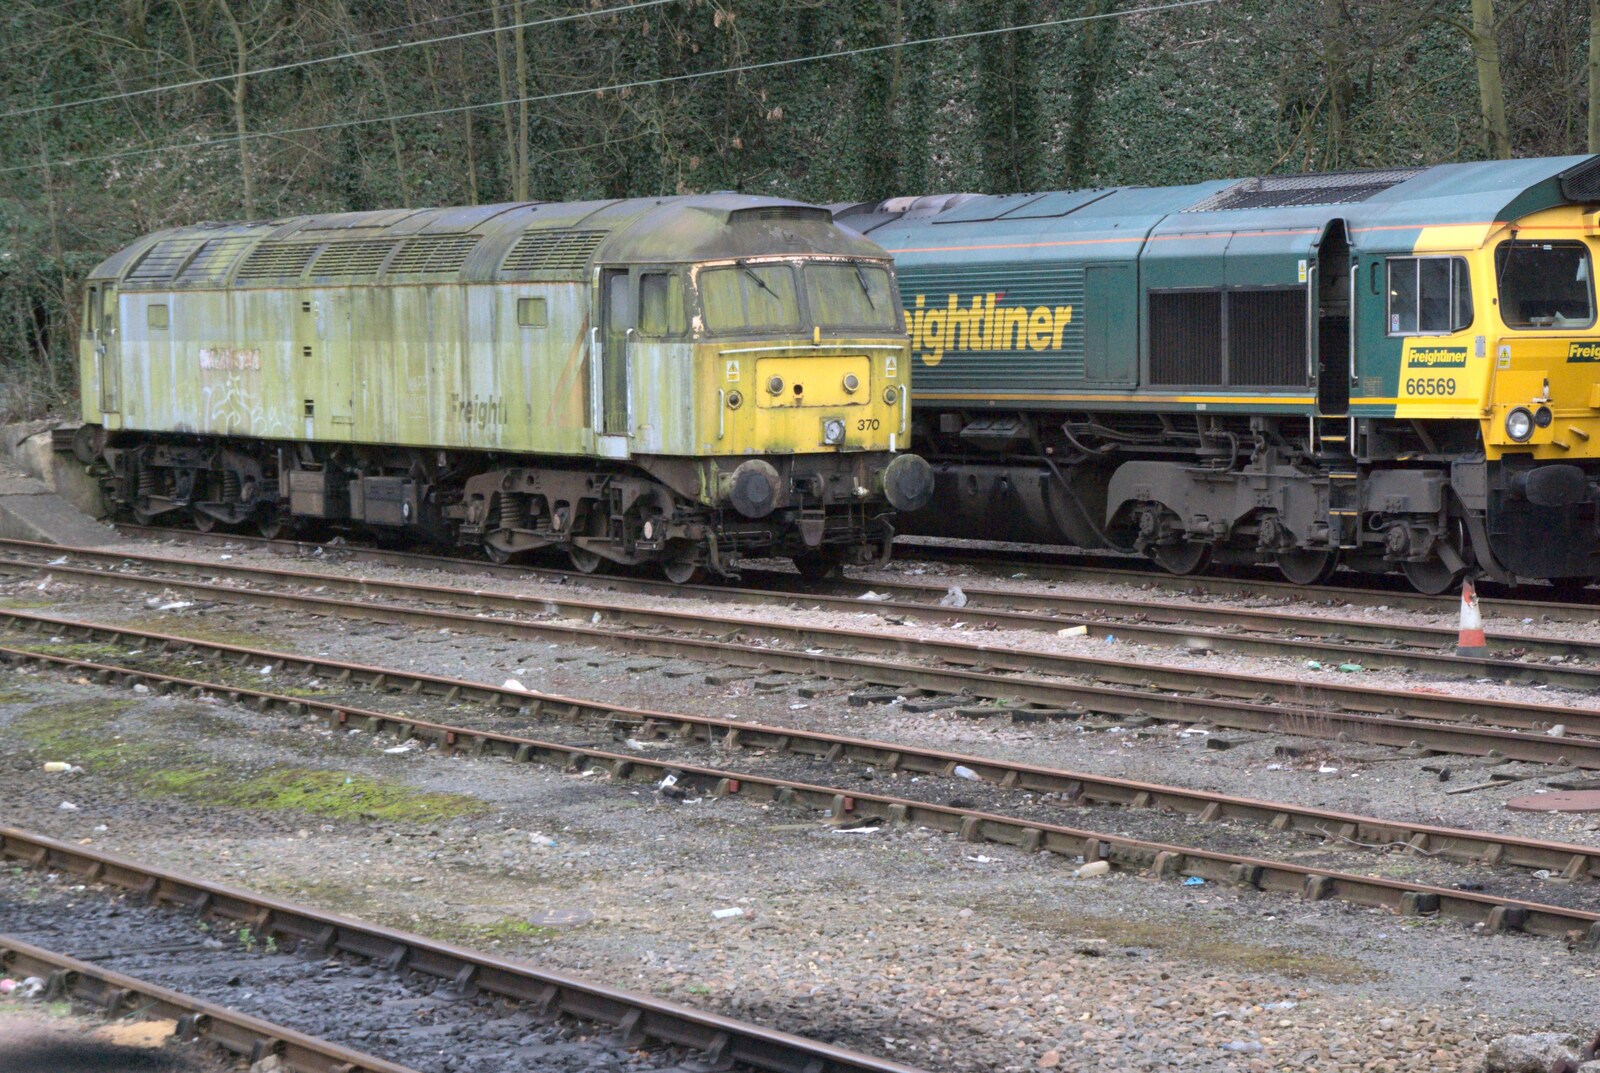 A derelict Class 47 Freightliner loco at Ipswich from A Trip to Orford Castle, Suffolk - 14th March 2009